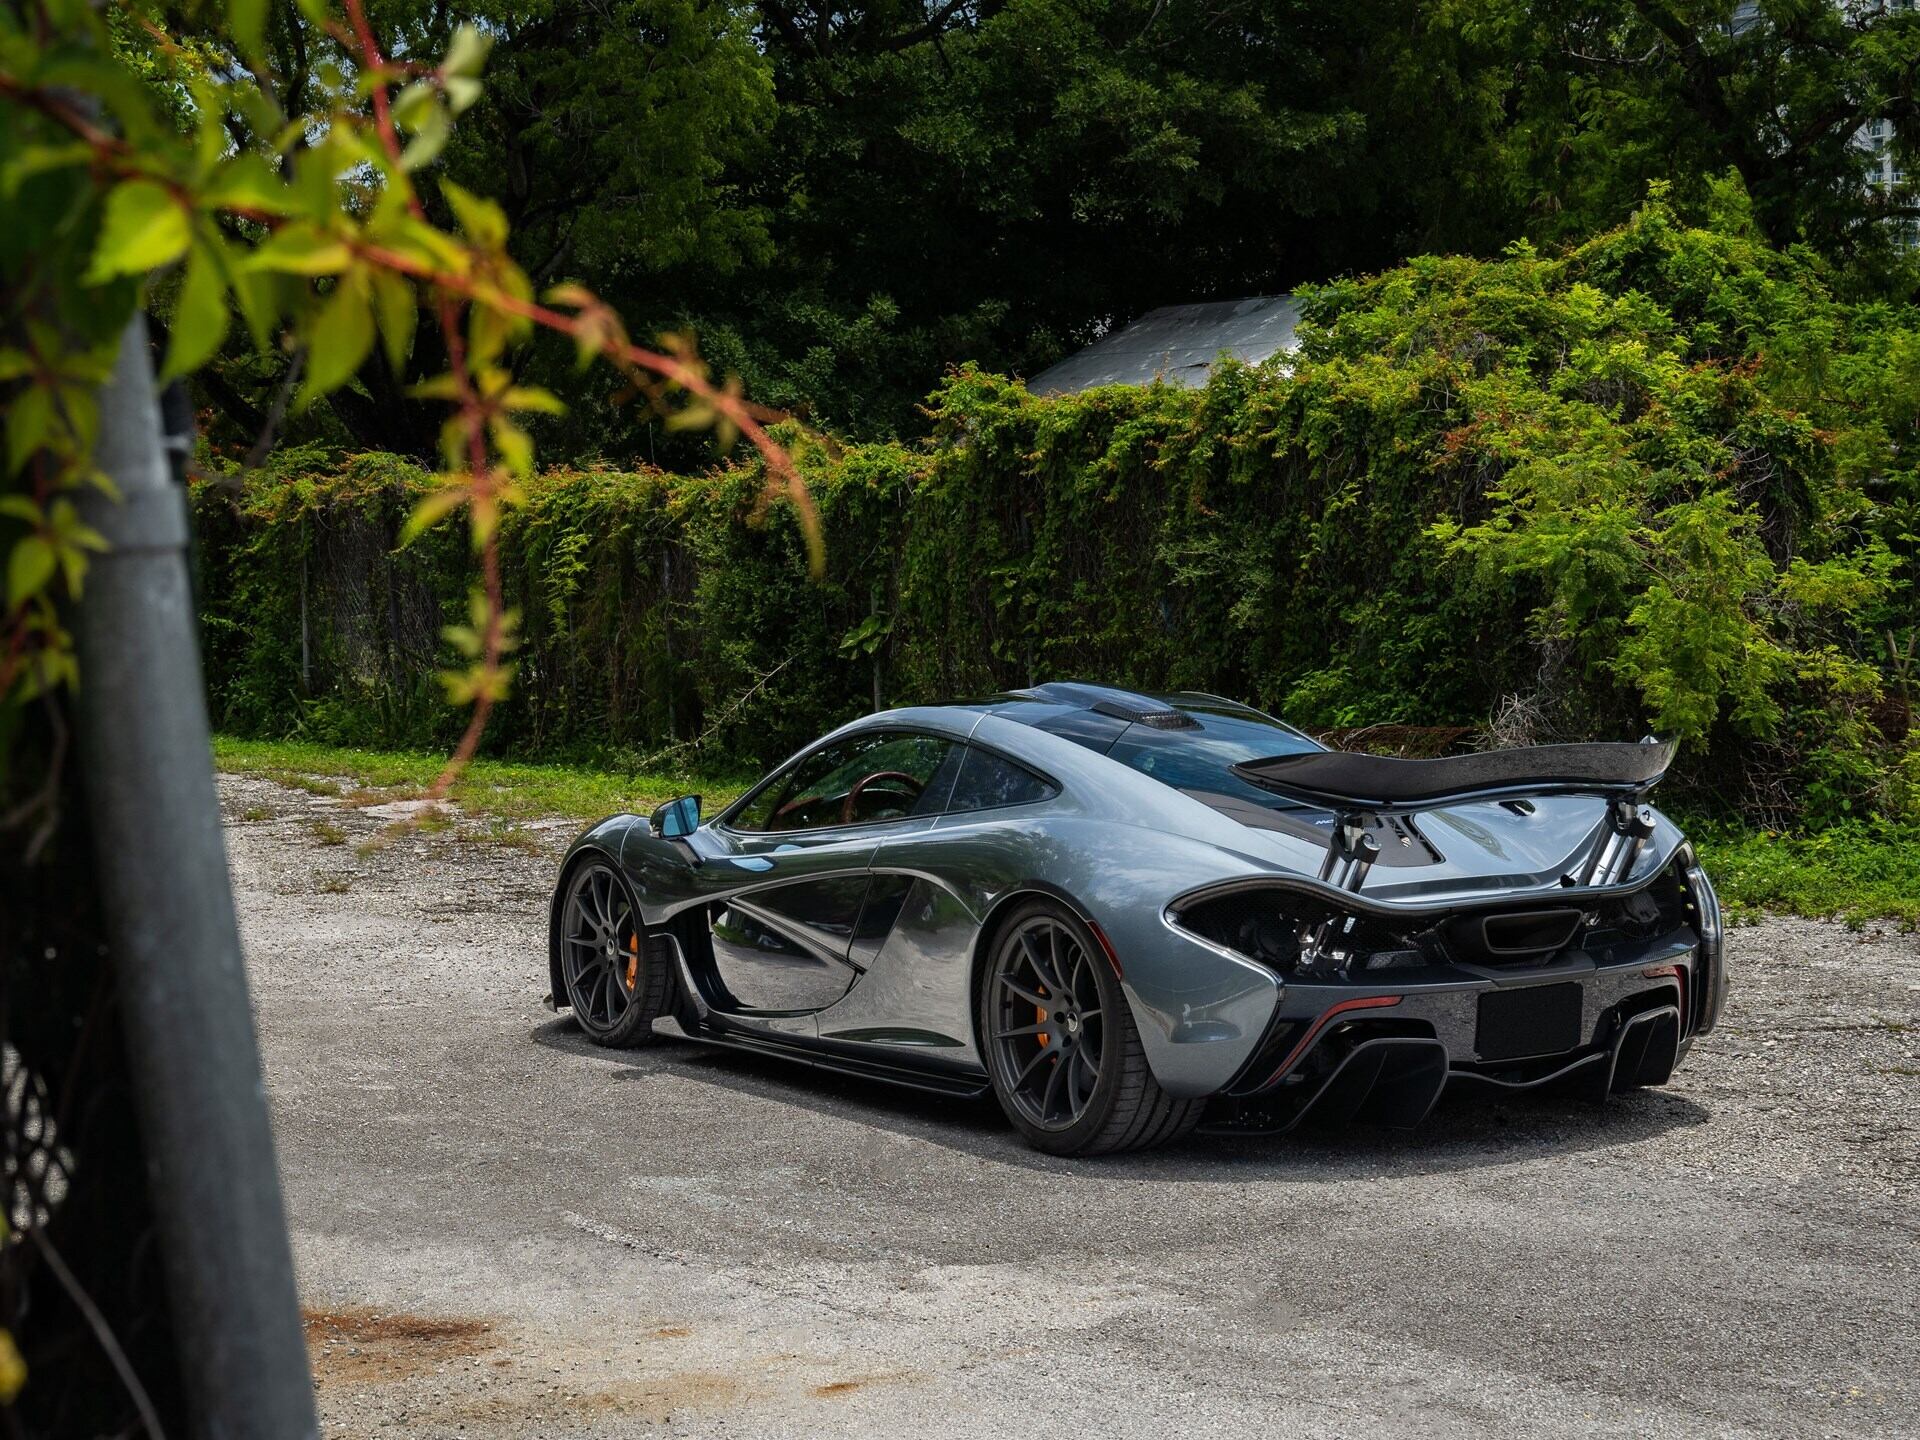 rear angled view of a grey 2015 McLaren P1